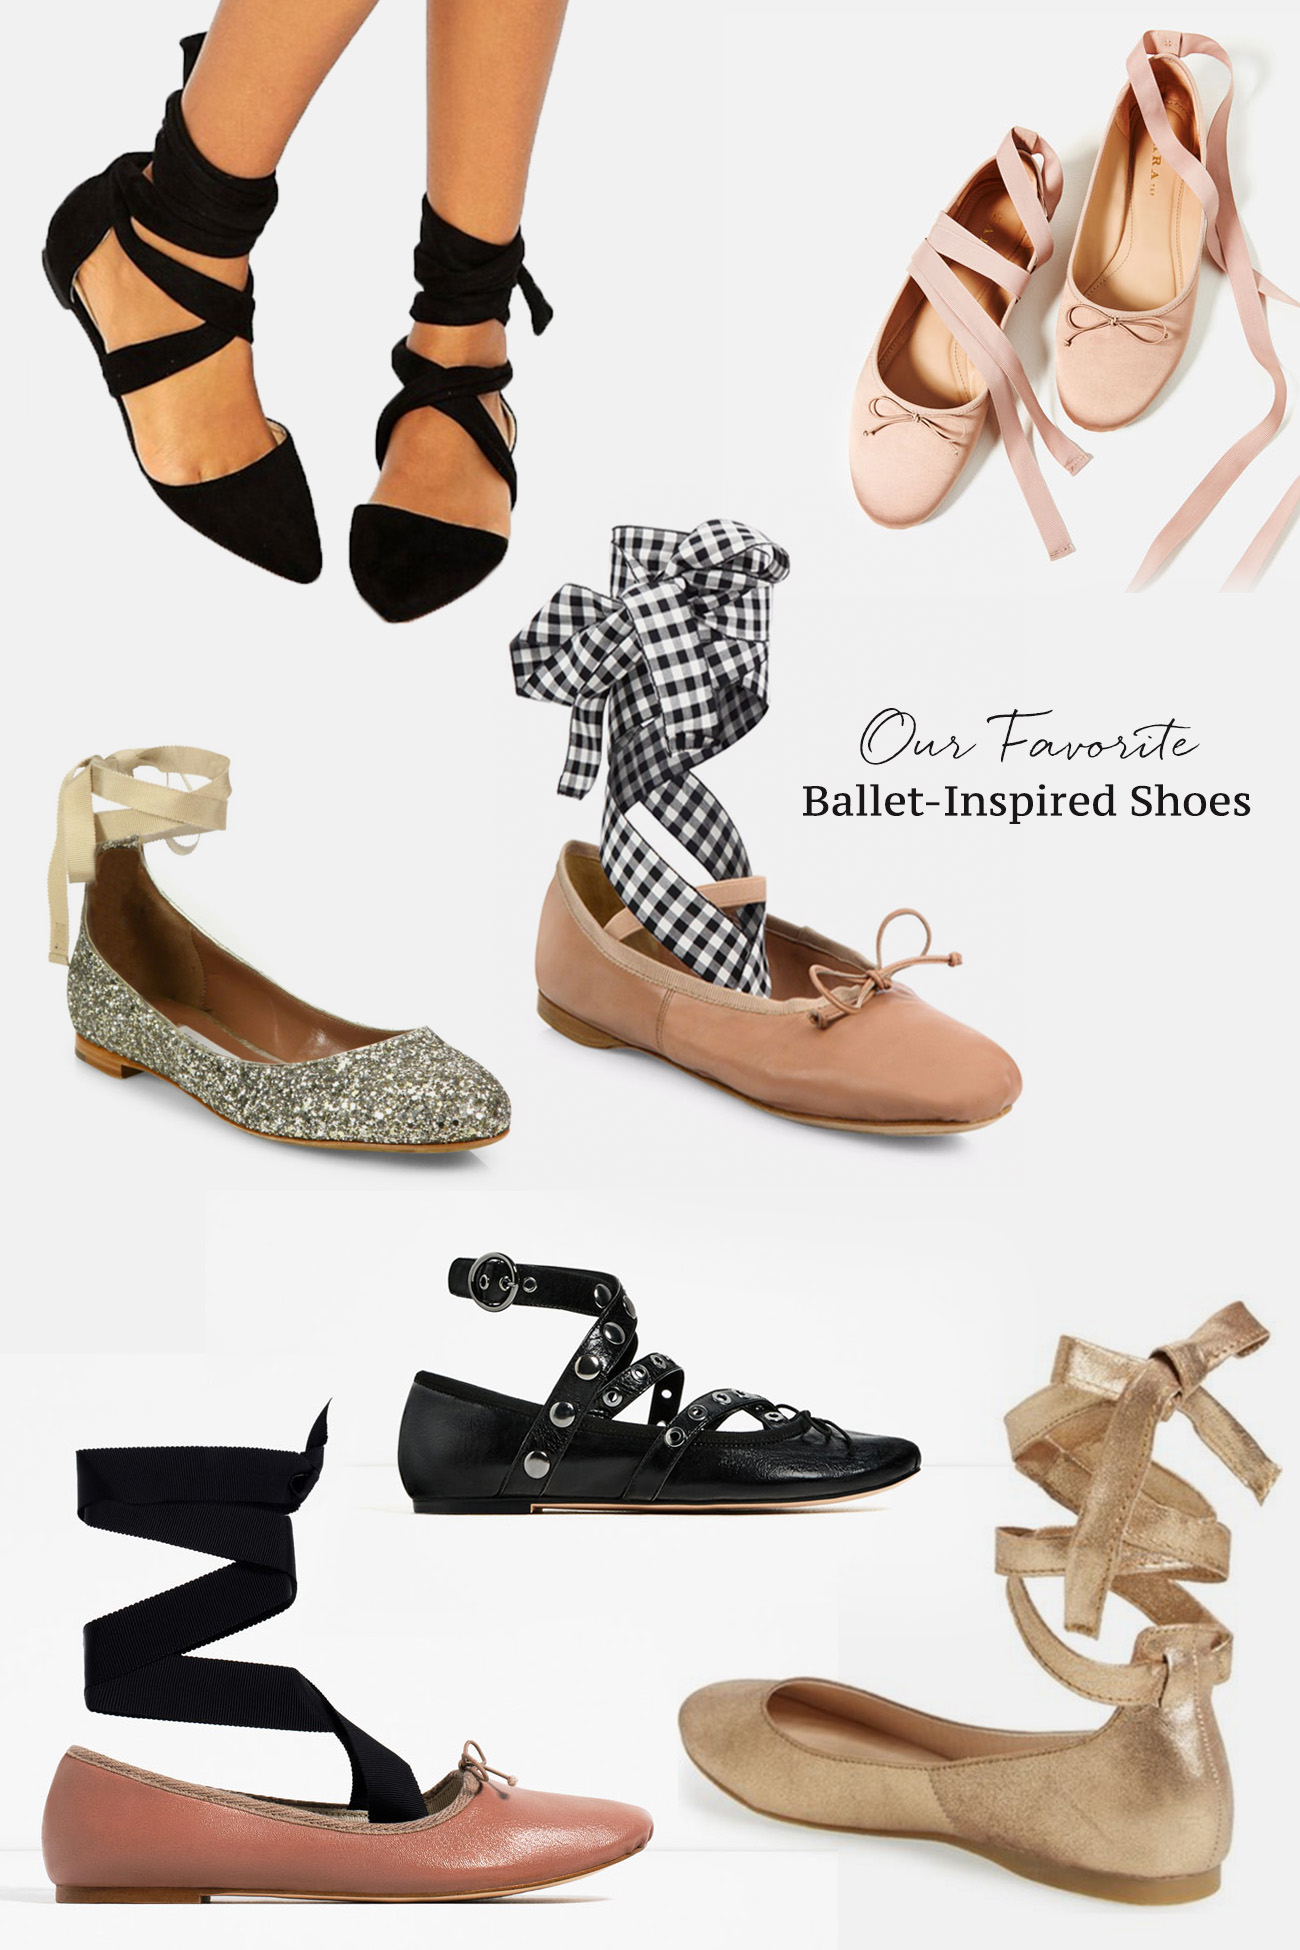 ballet-inspired shoes